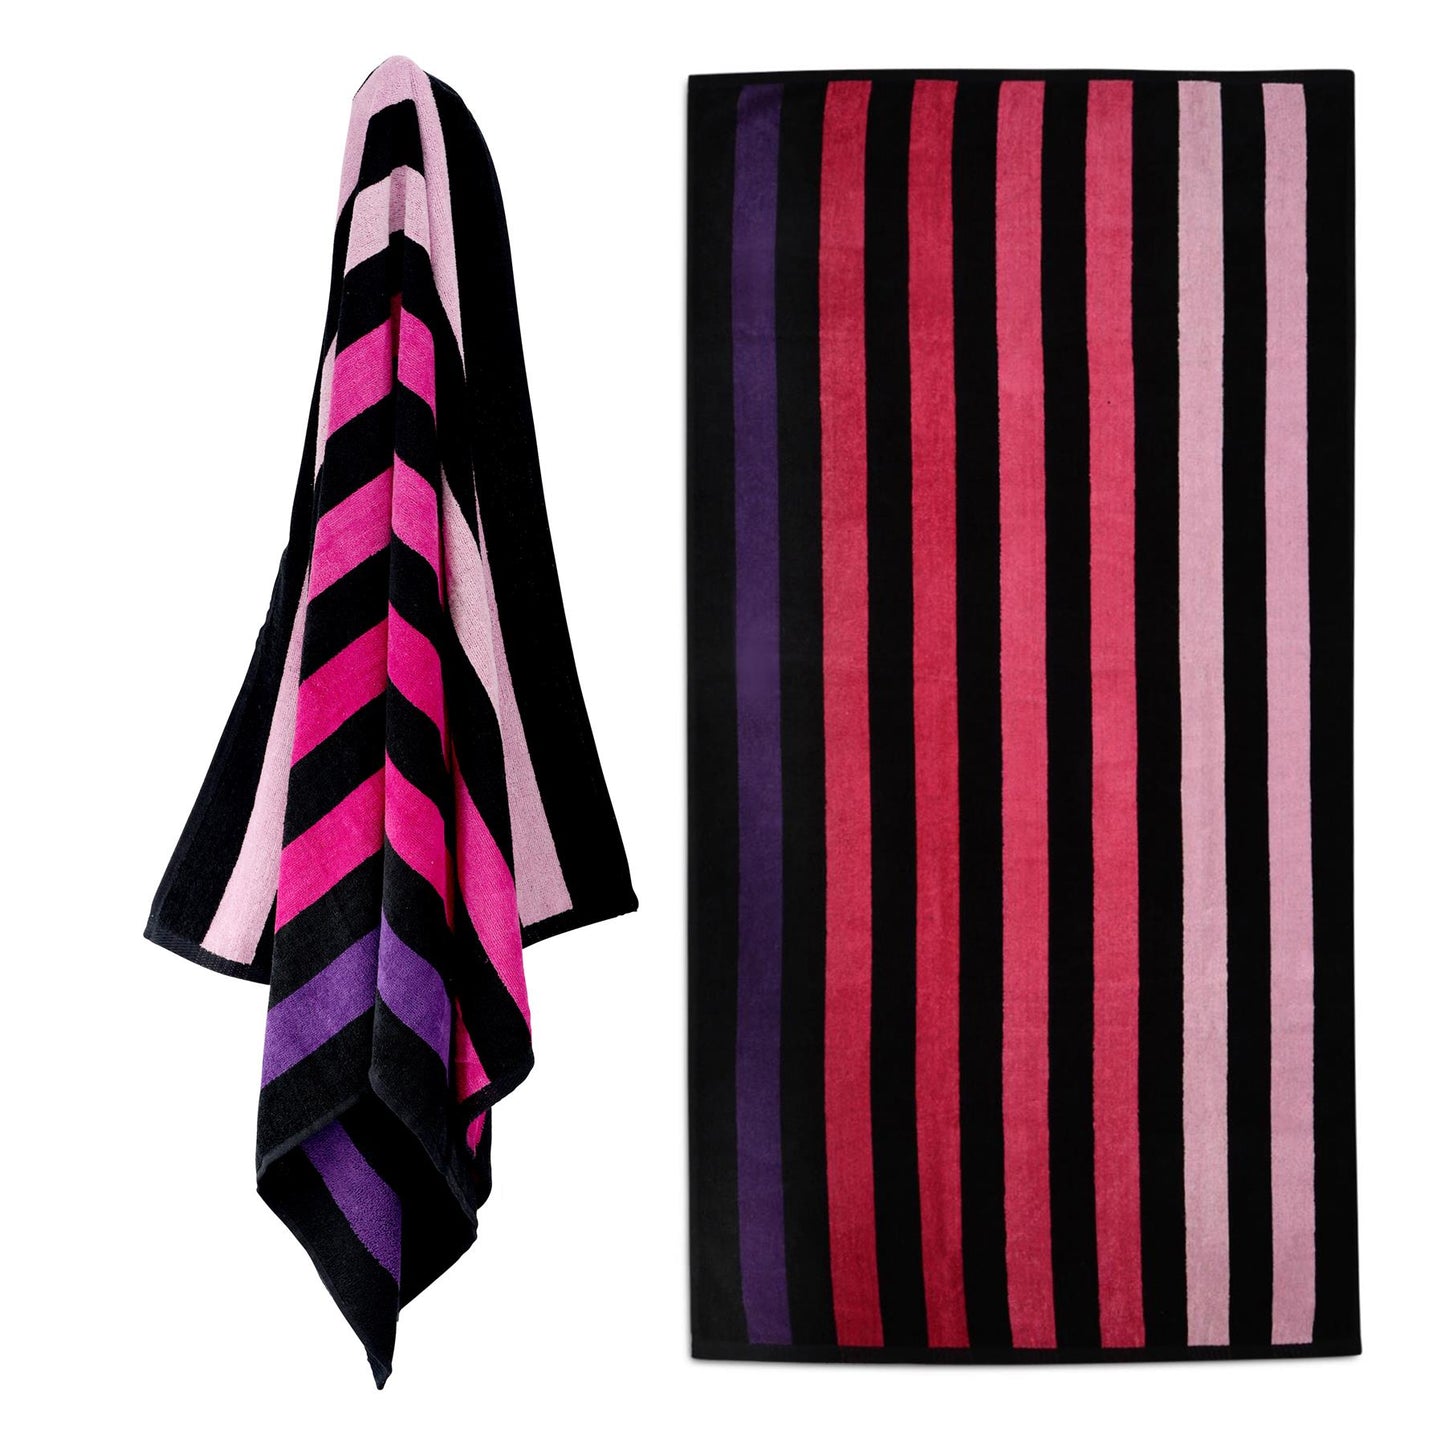 Large Velour Striped Beach Towel (Sunset) by Geezy - UKBuyZone